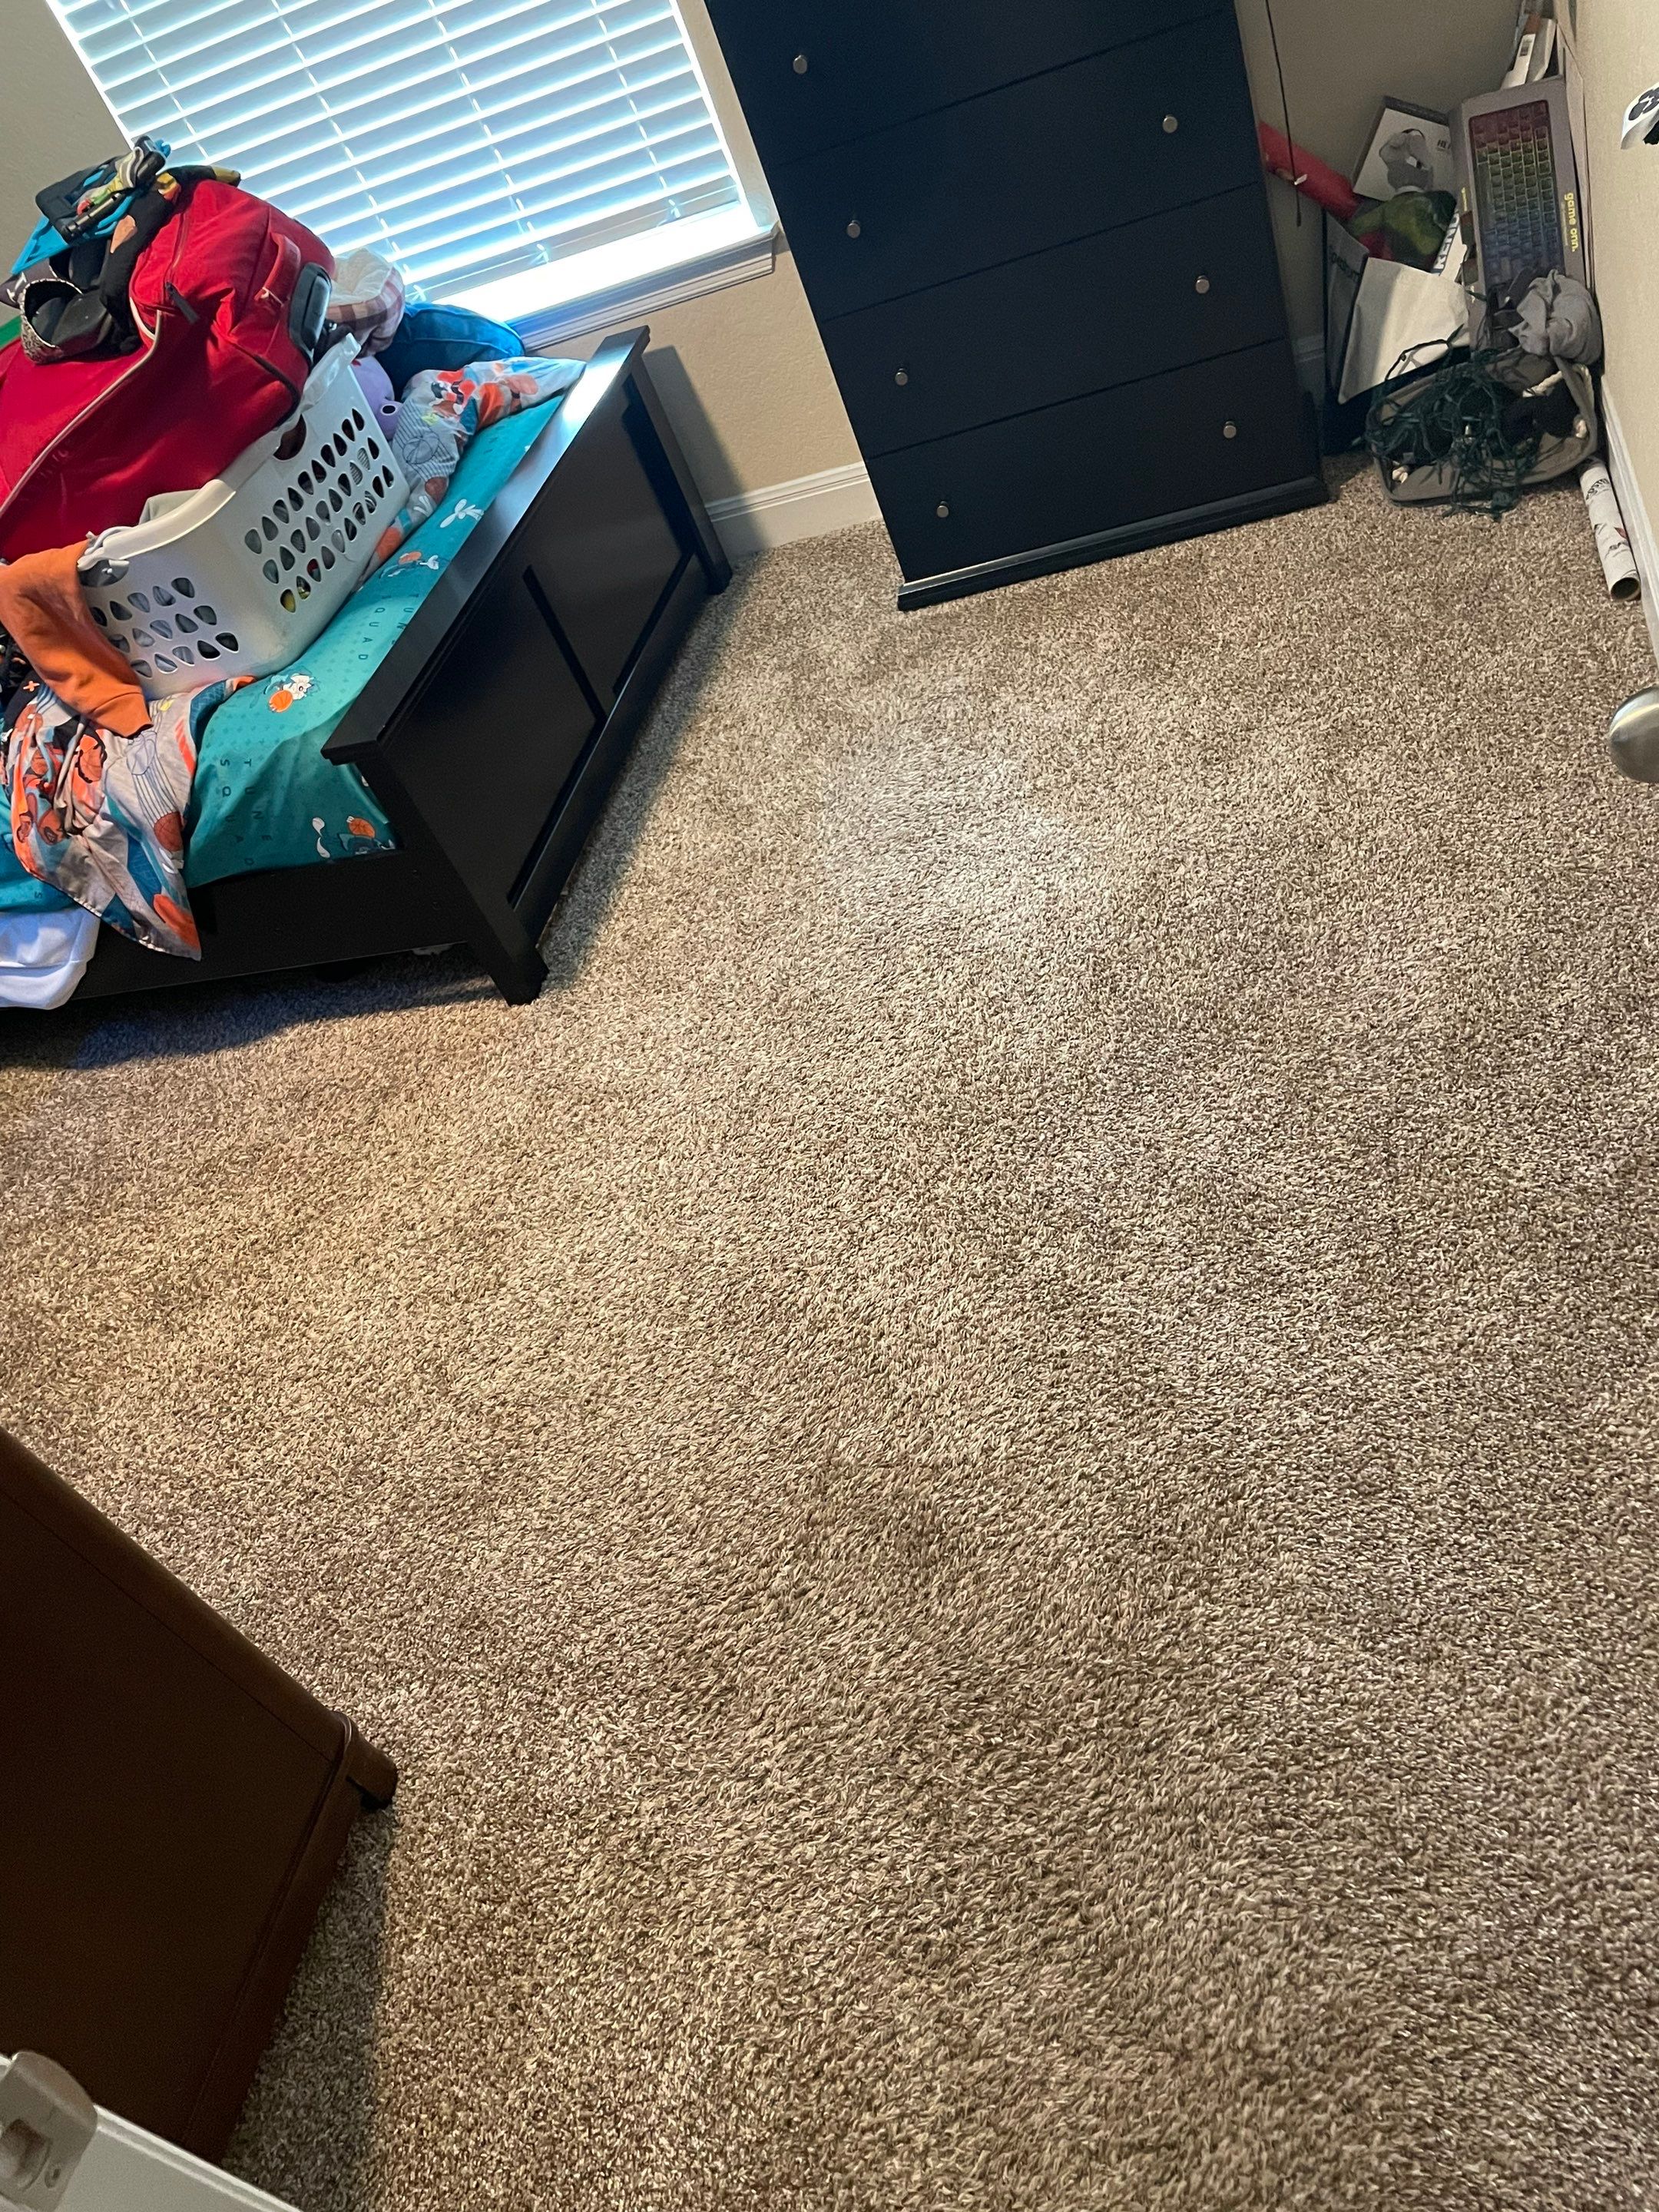 carpet cleaning service deep cleaning residential wall to wall carpeting removing dirt and stains